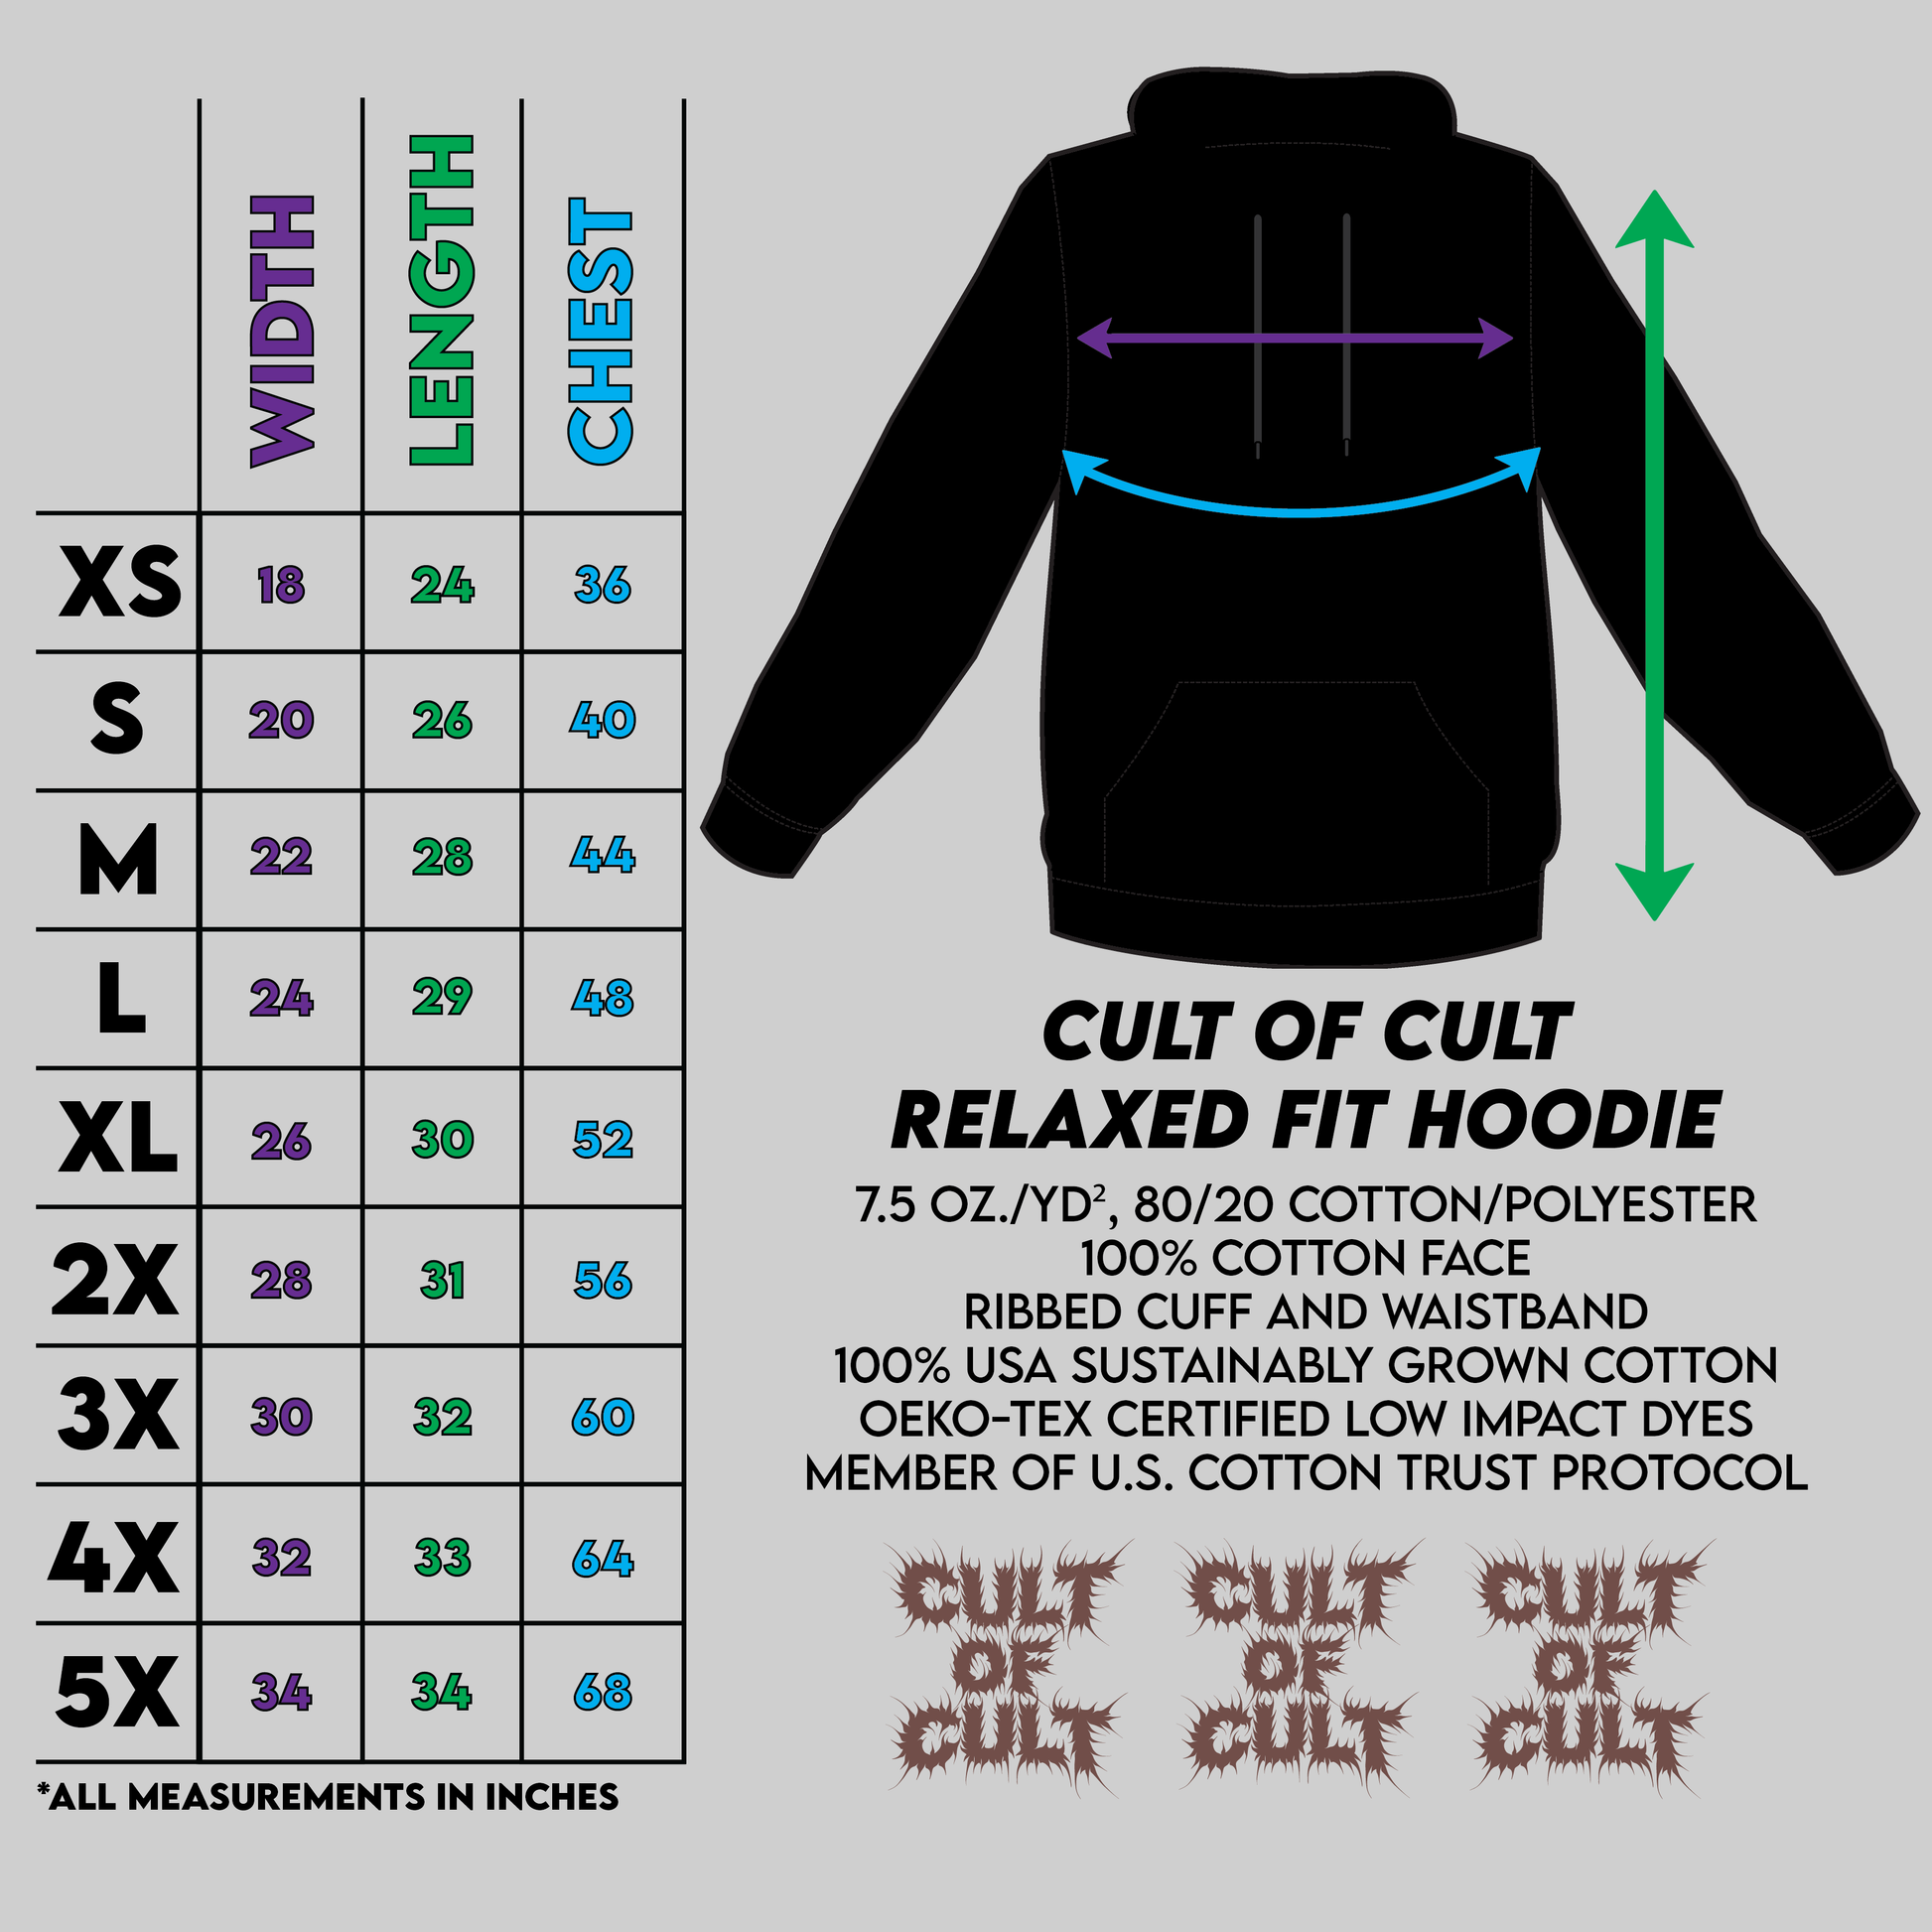 cult of cult hoodie sizing chart